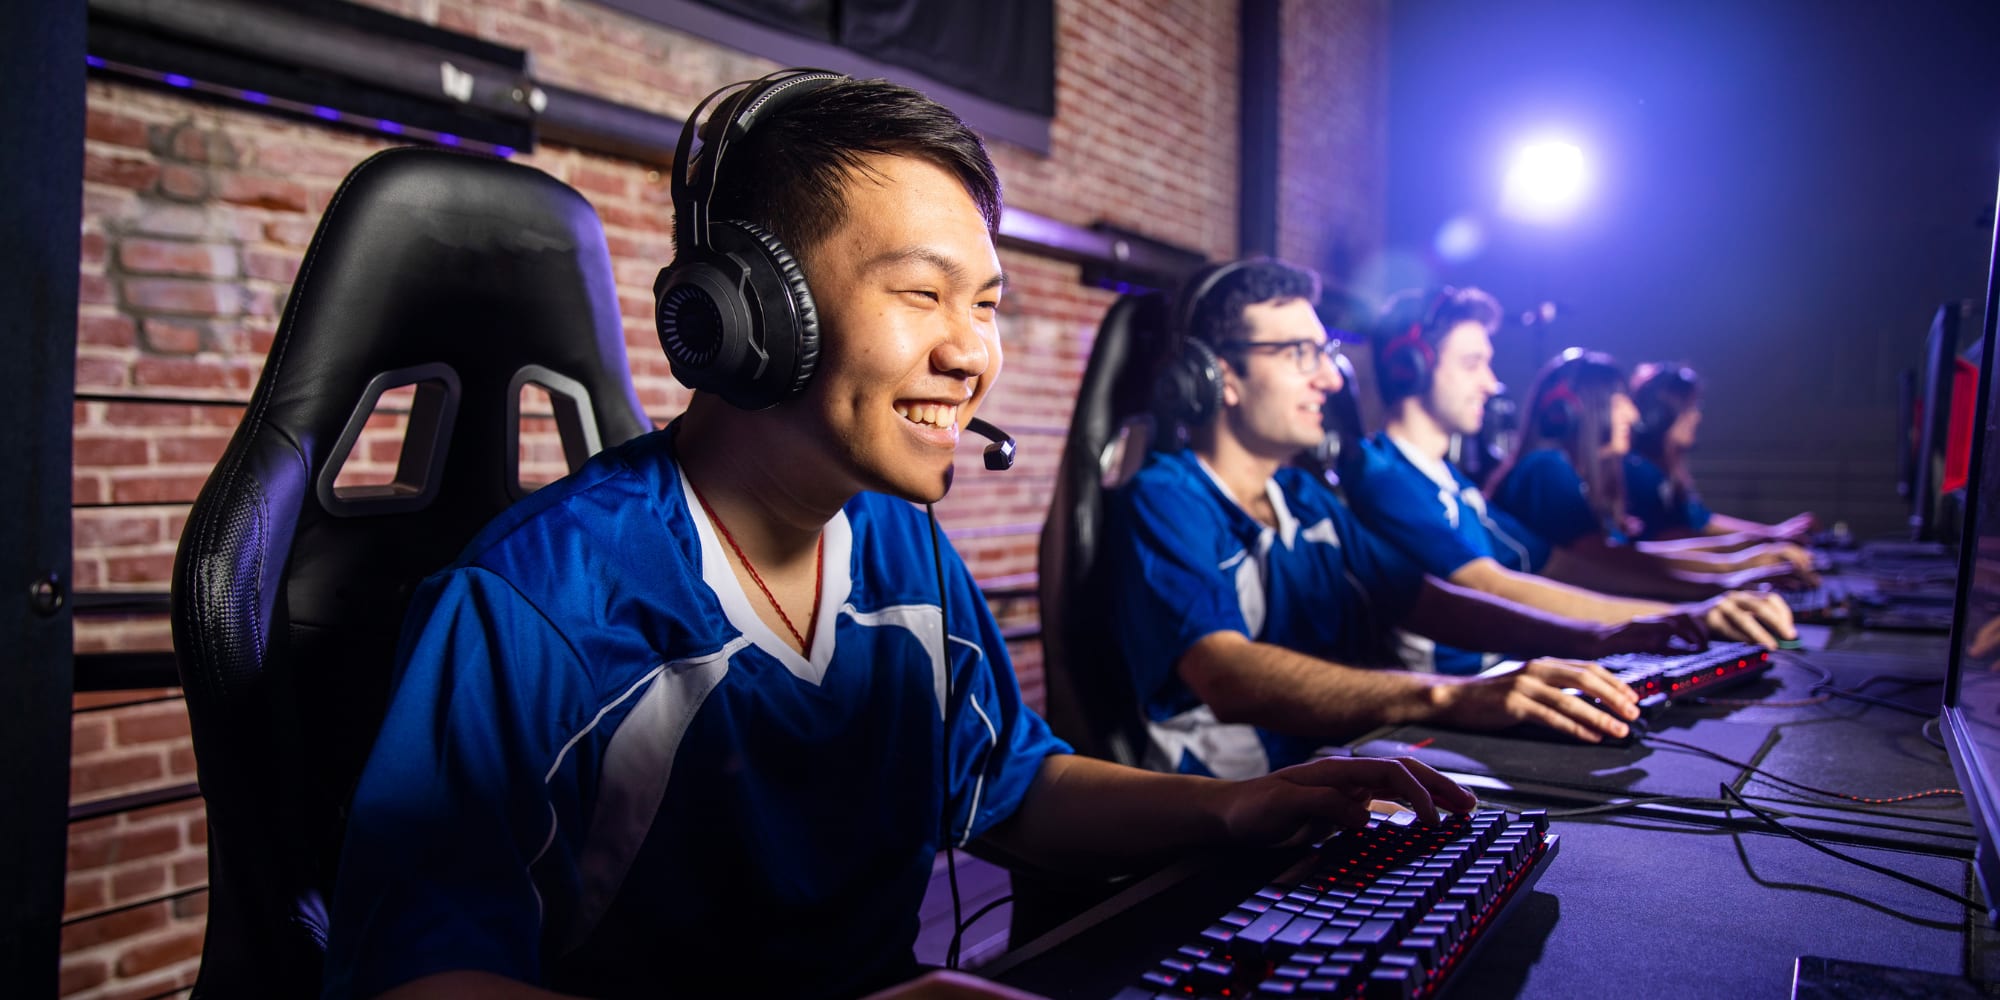 How to apply for an eSports scholarship